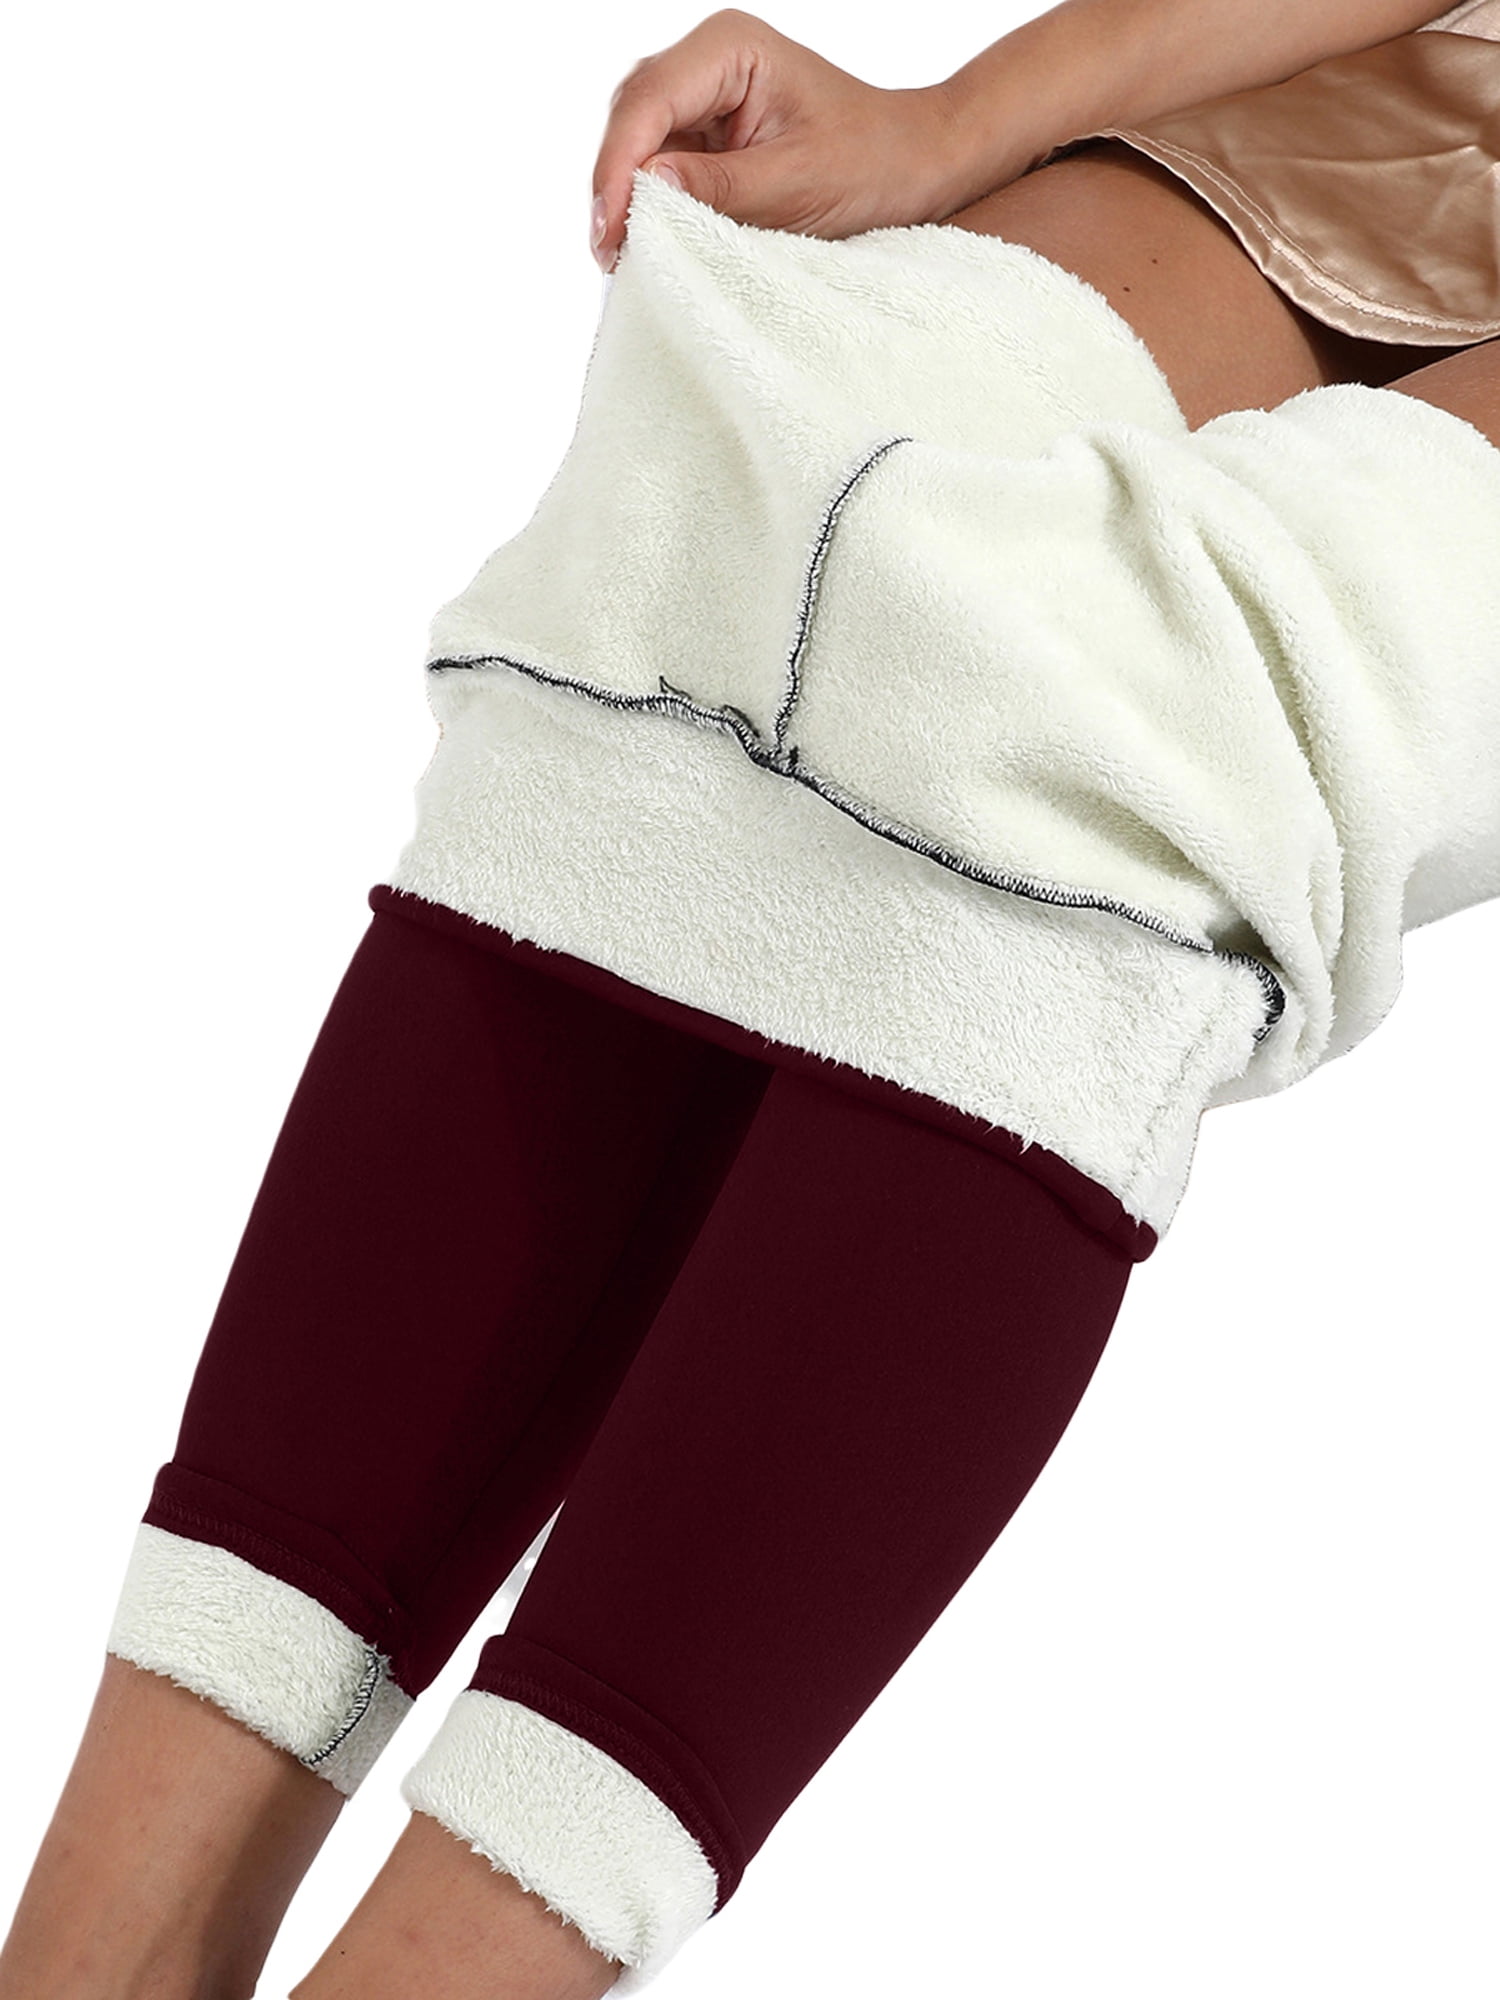 Afunbaby Women Fleece Lined Leggings Elastic High Waist Comfy Fuzzy Plush  Thick Lined Tight Pants Winter Warm Wool Bottoms 